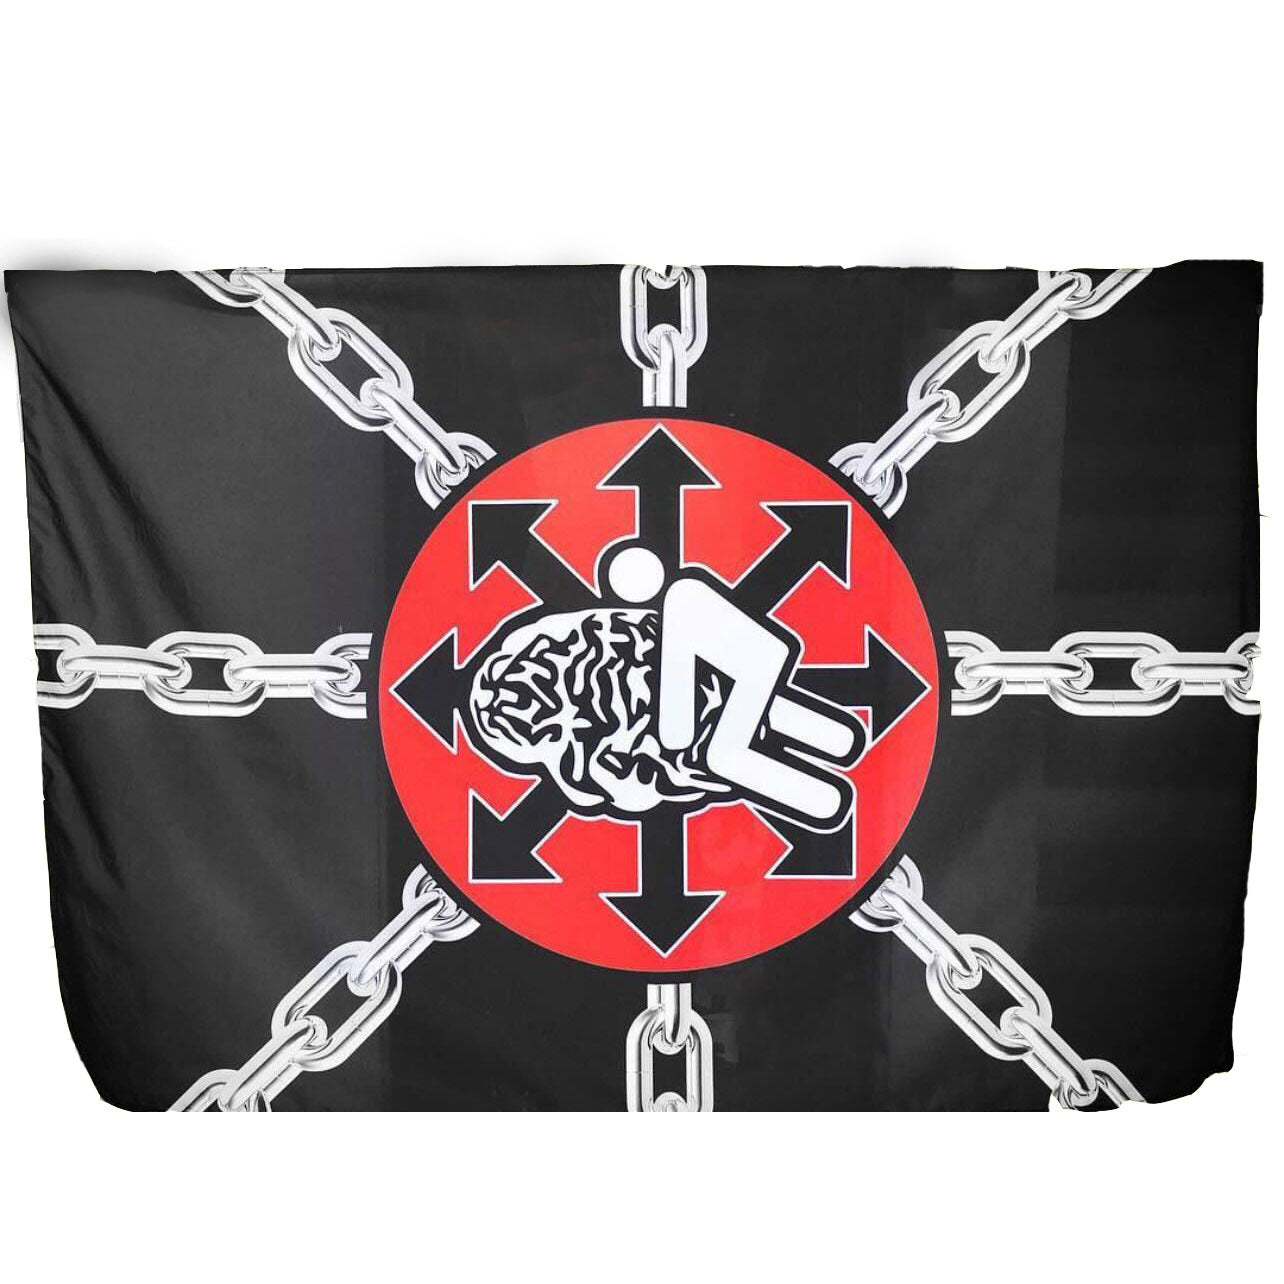 OMF Chain Flag [LOW STOCK!] [SHIPS EARLY JUNE]